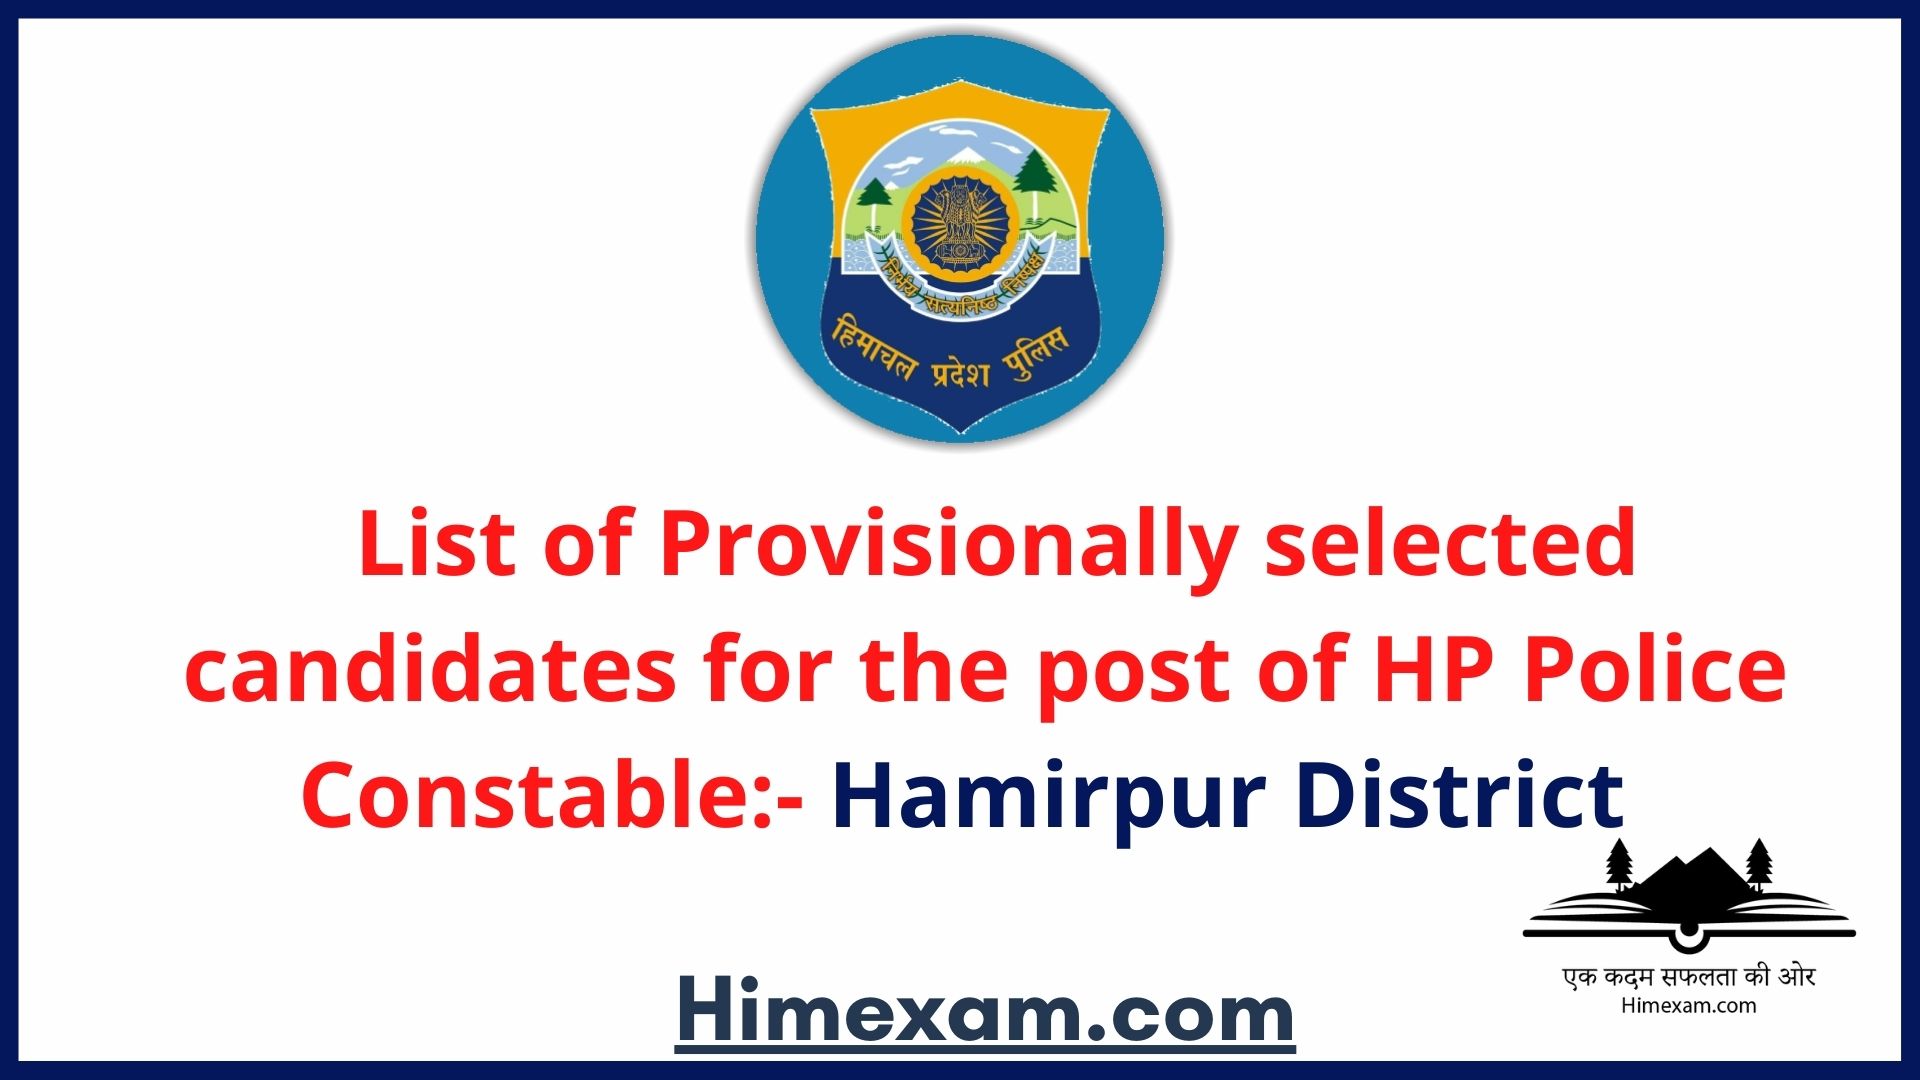 List of Provisionally selected candidates for the post of HP Police Constable:- Hamirpur District